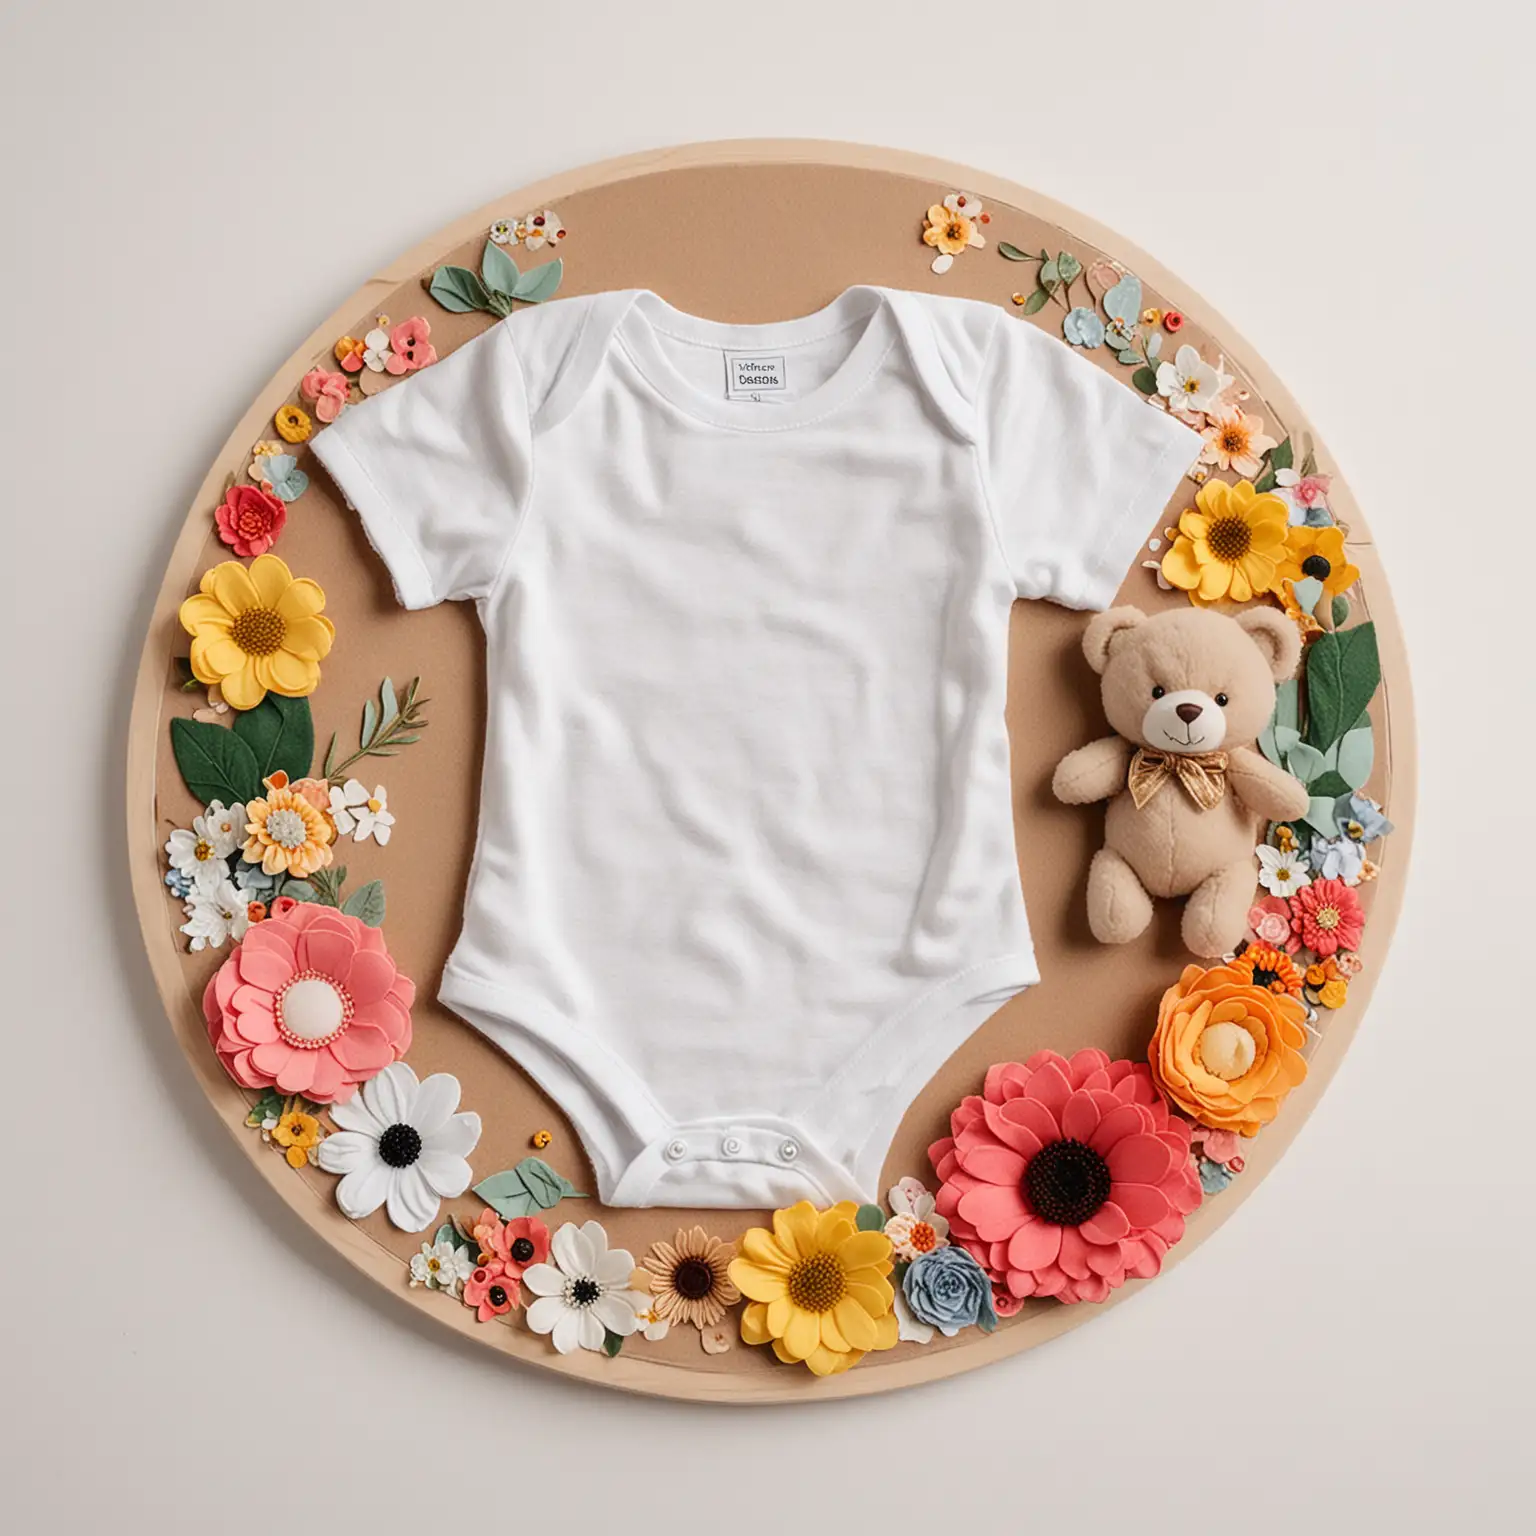 Flat Lay Baby Announcement Onesie with Teddy Bear and Flowers